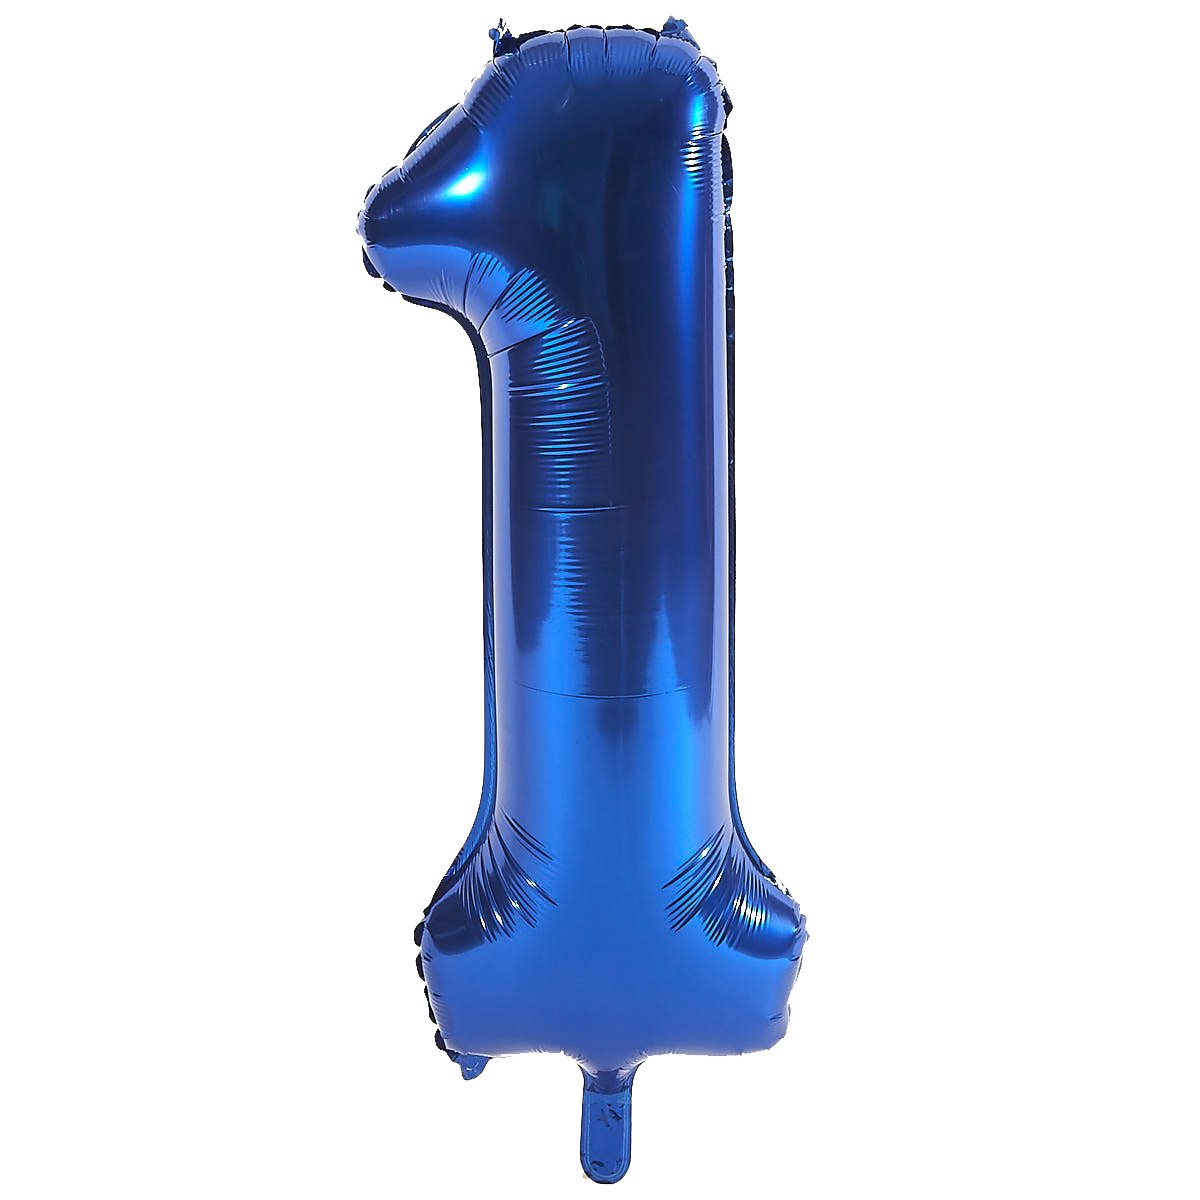 Age 13 Giant Foil Helium Numeral Balloons - Blue (deflated)